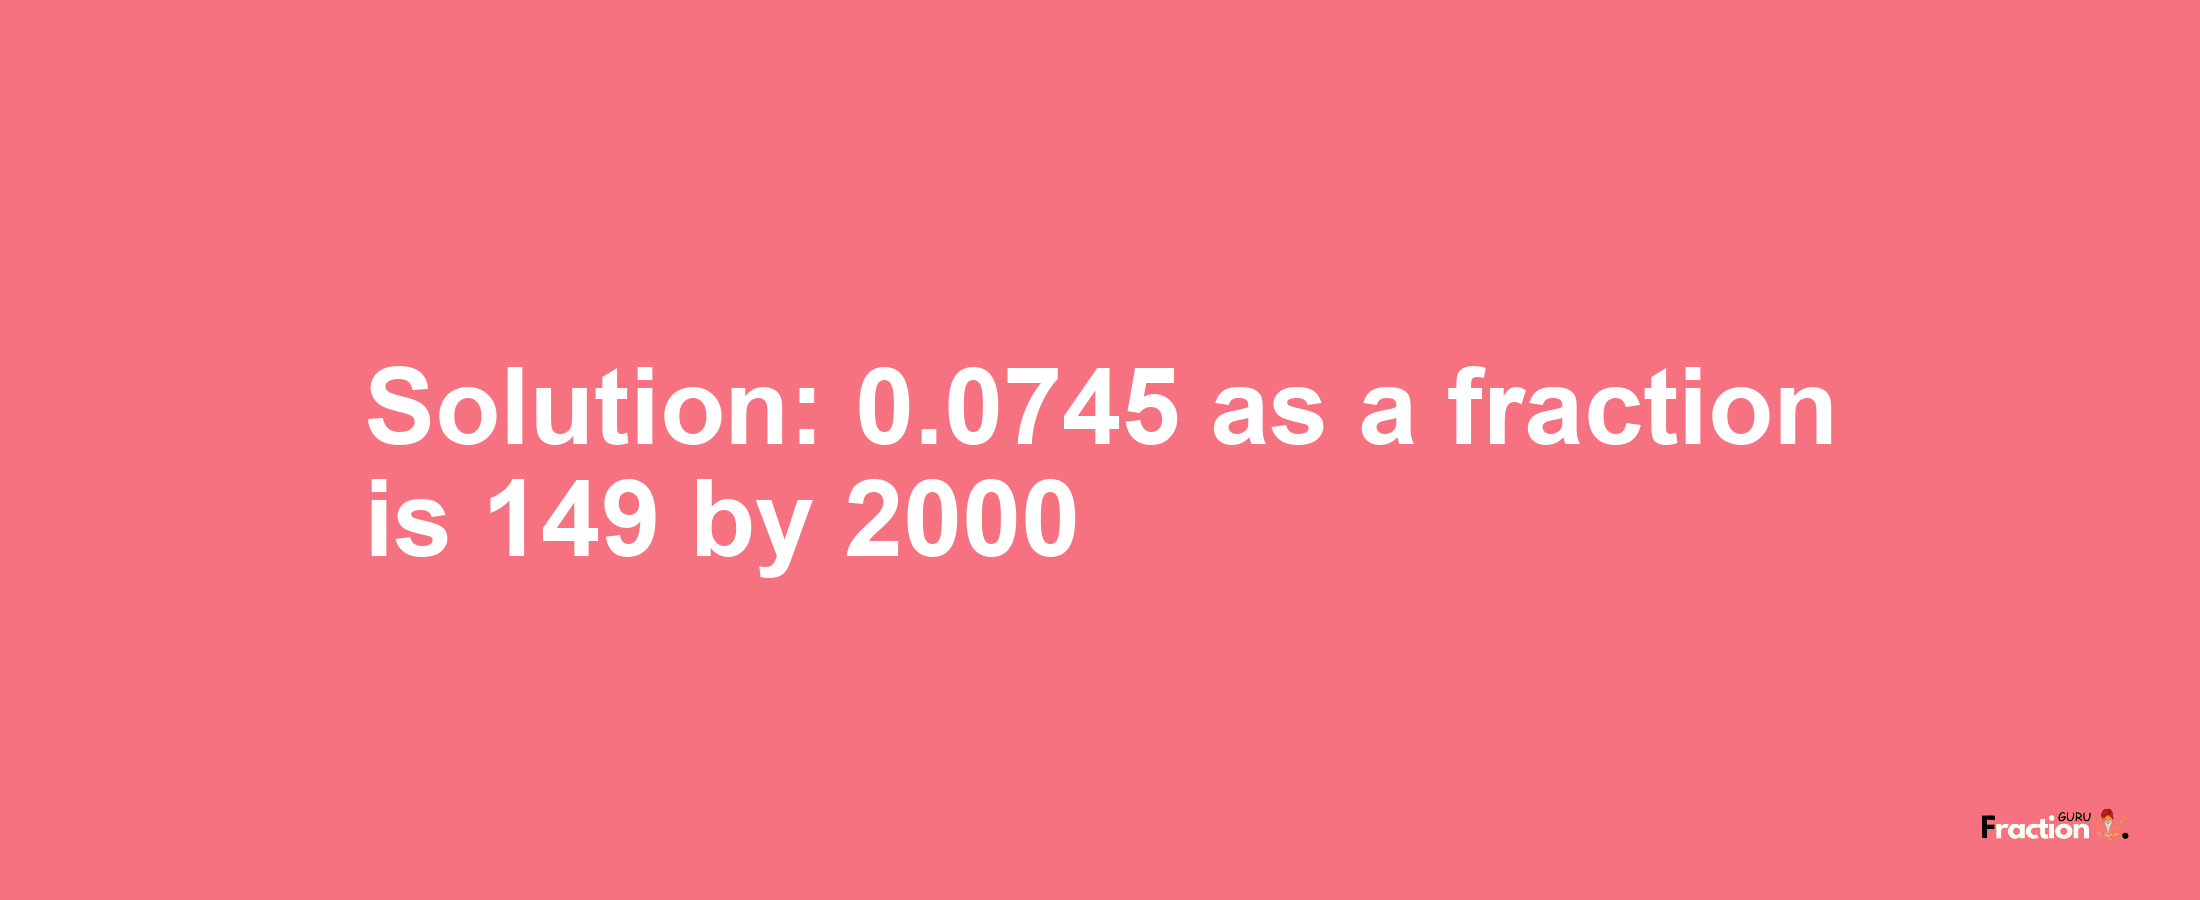 Solution:0.0745 as a fraction is 149/2000